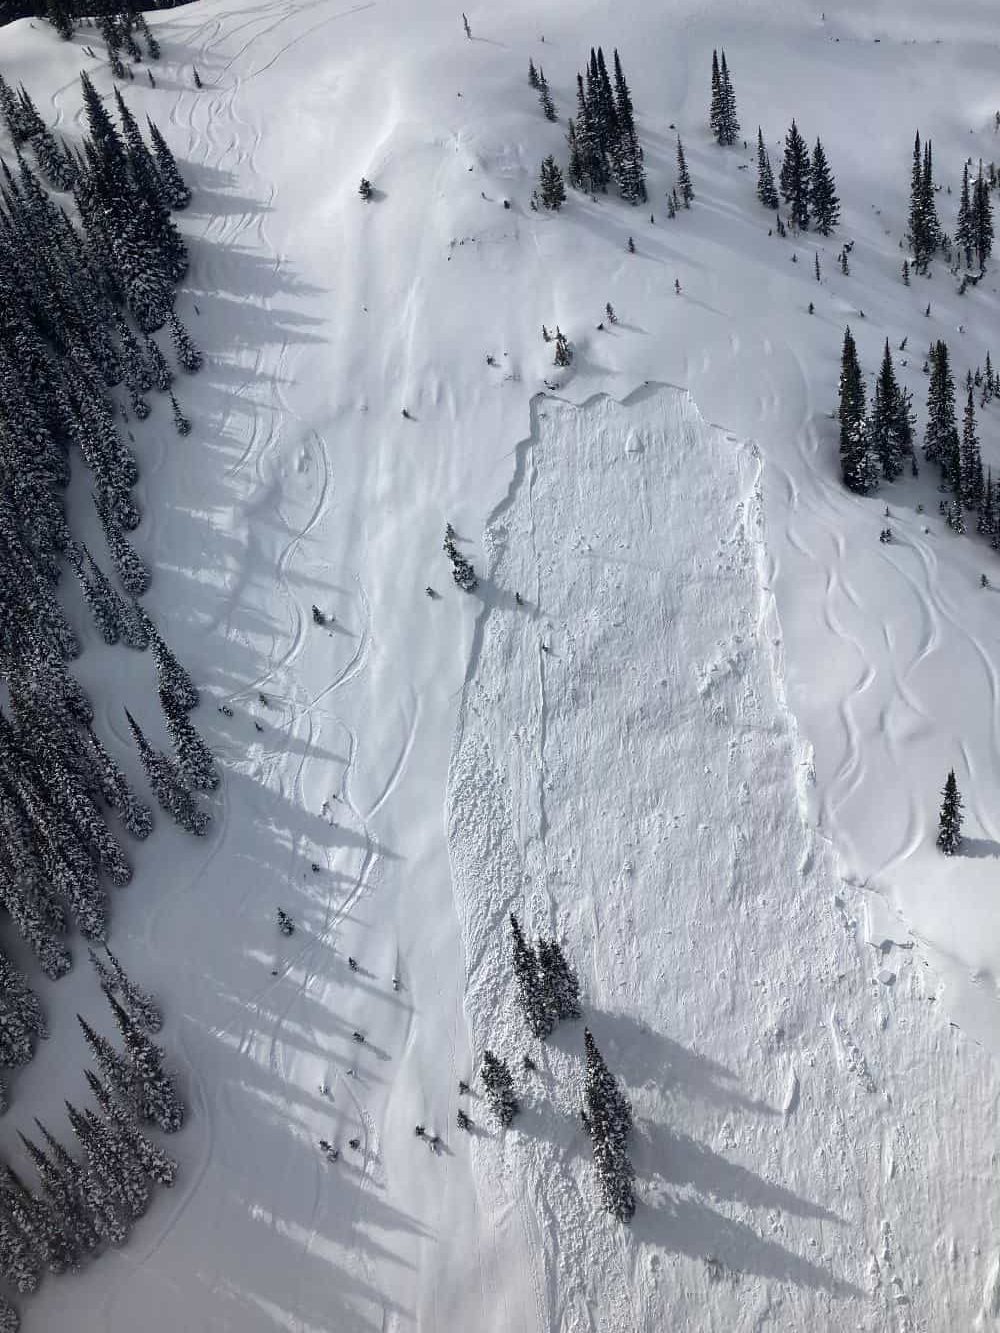 UC Berkeley Alum Killed in Wyoming Avalanche While Skiing